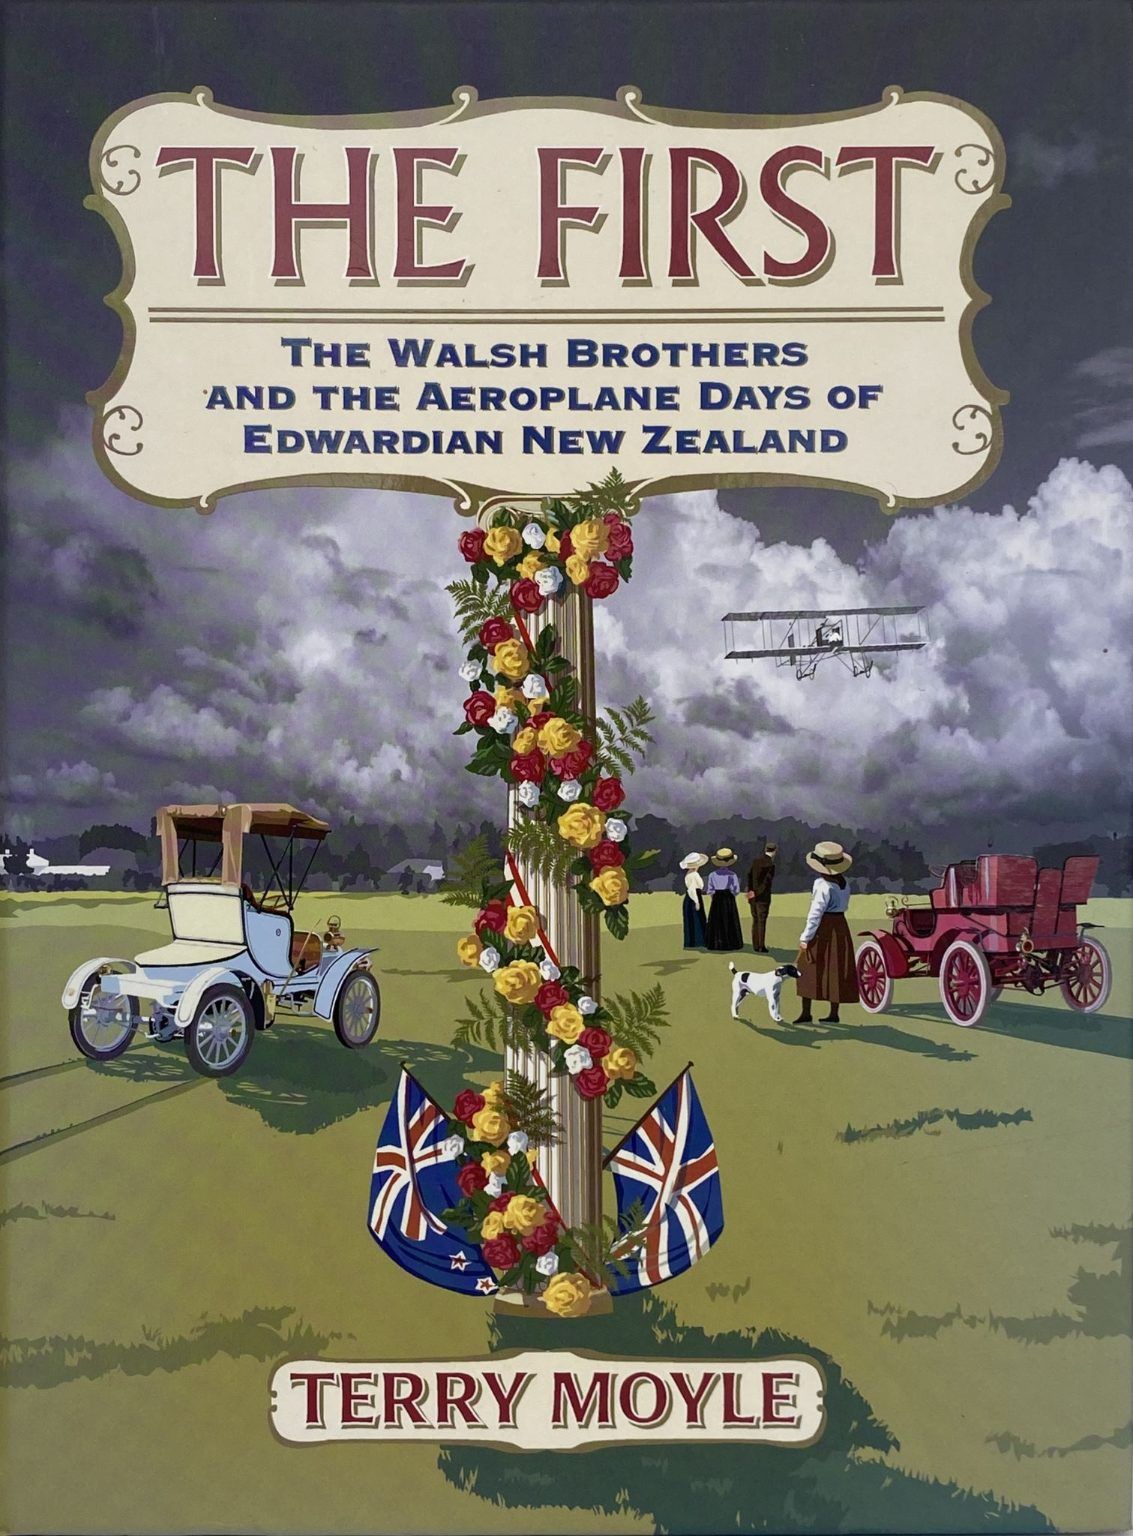 THE FIRST: The Walsh Brothers and the Aeroplane days of Edwardian New Zealand